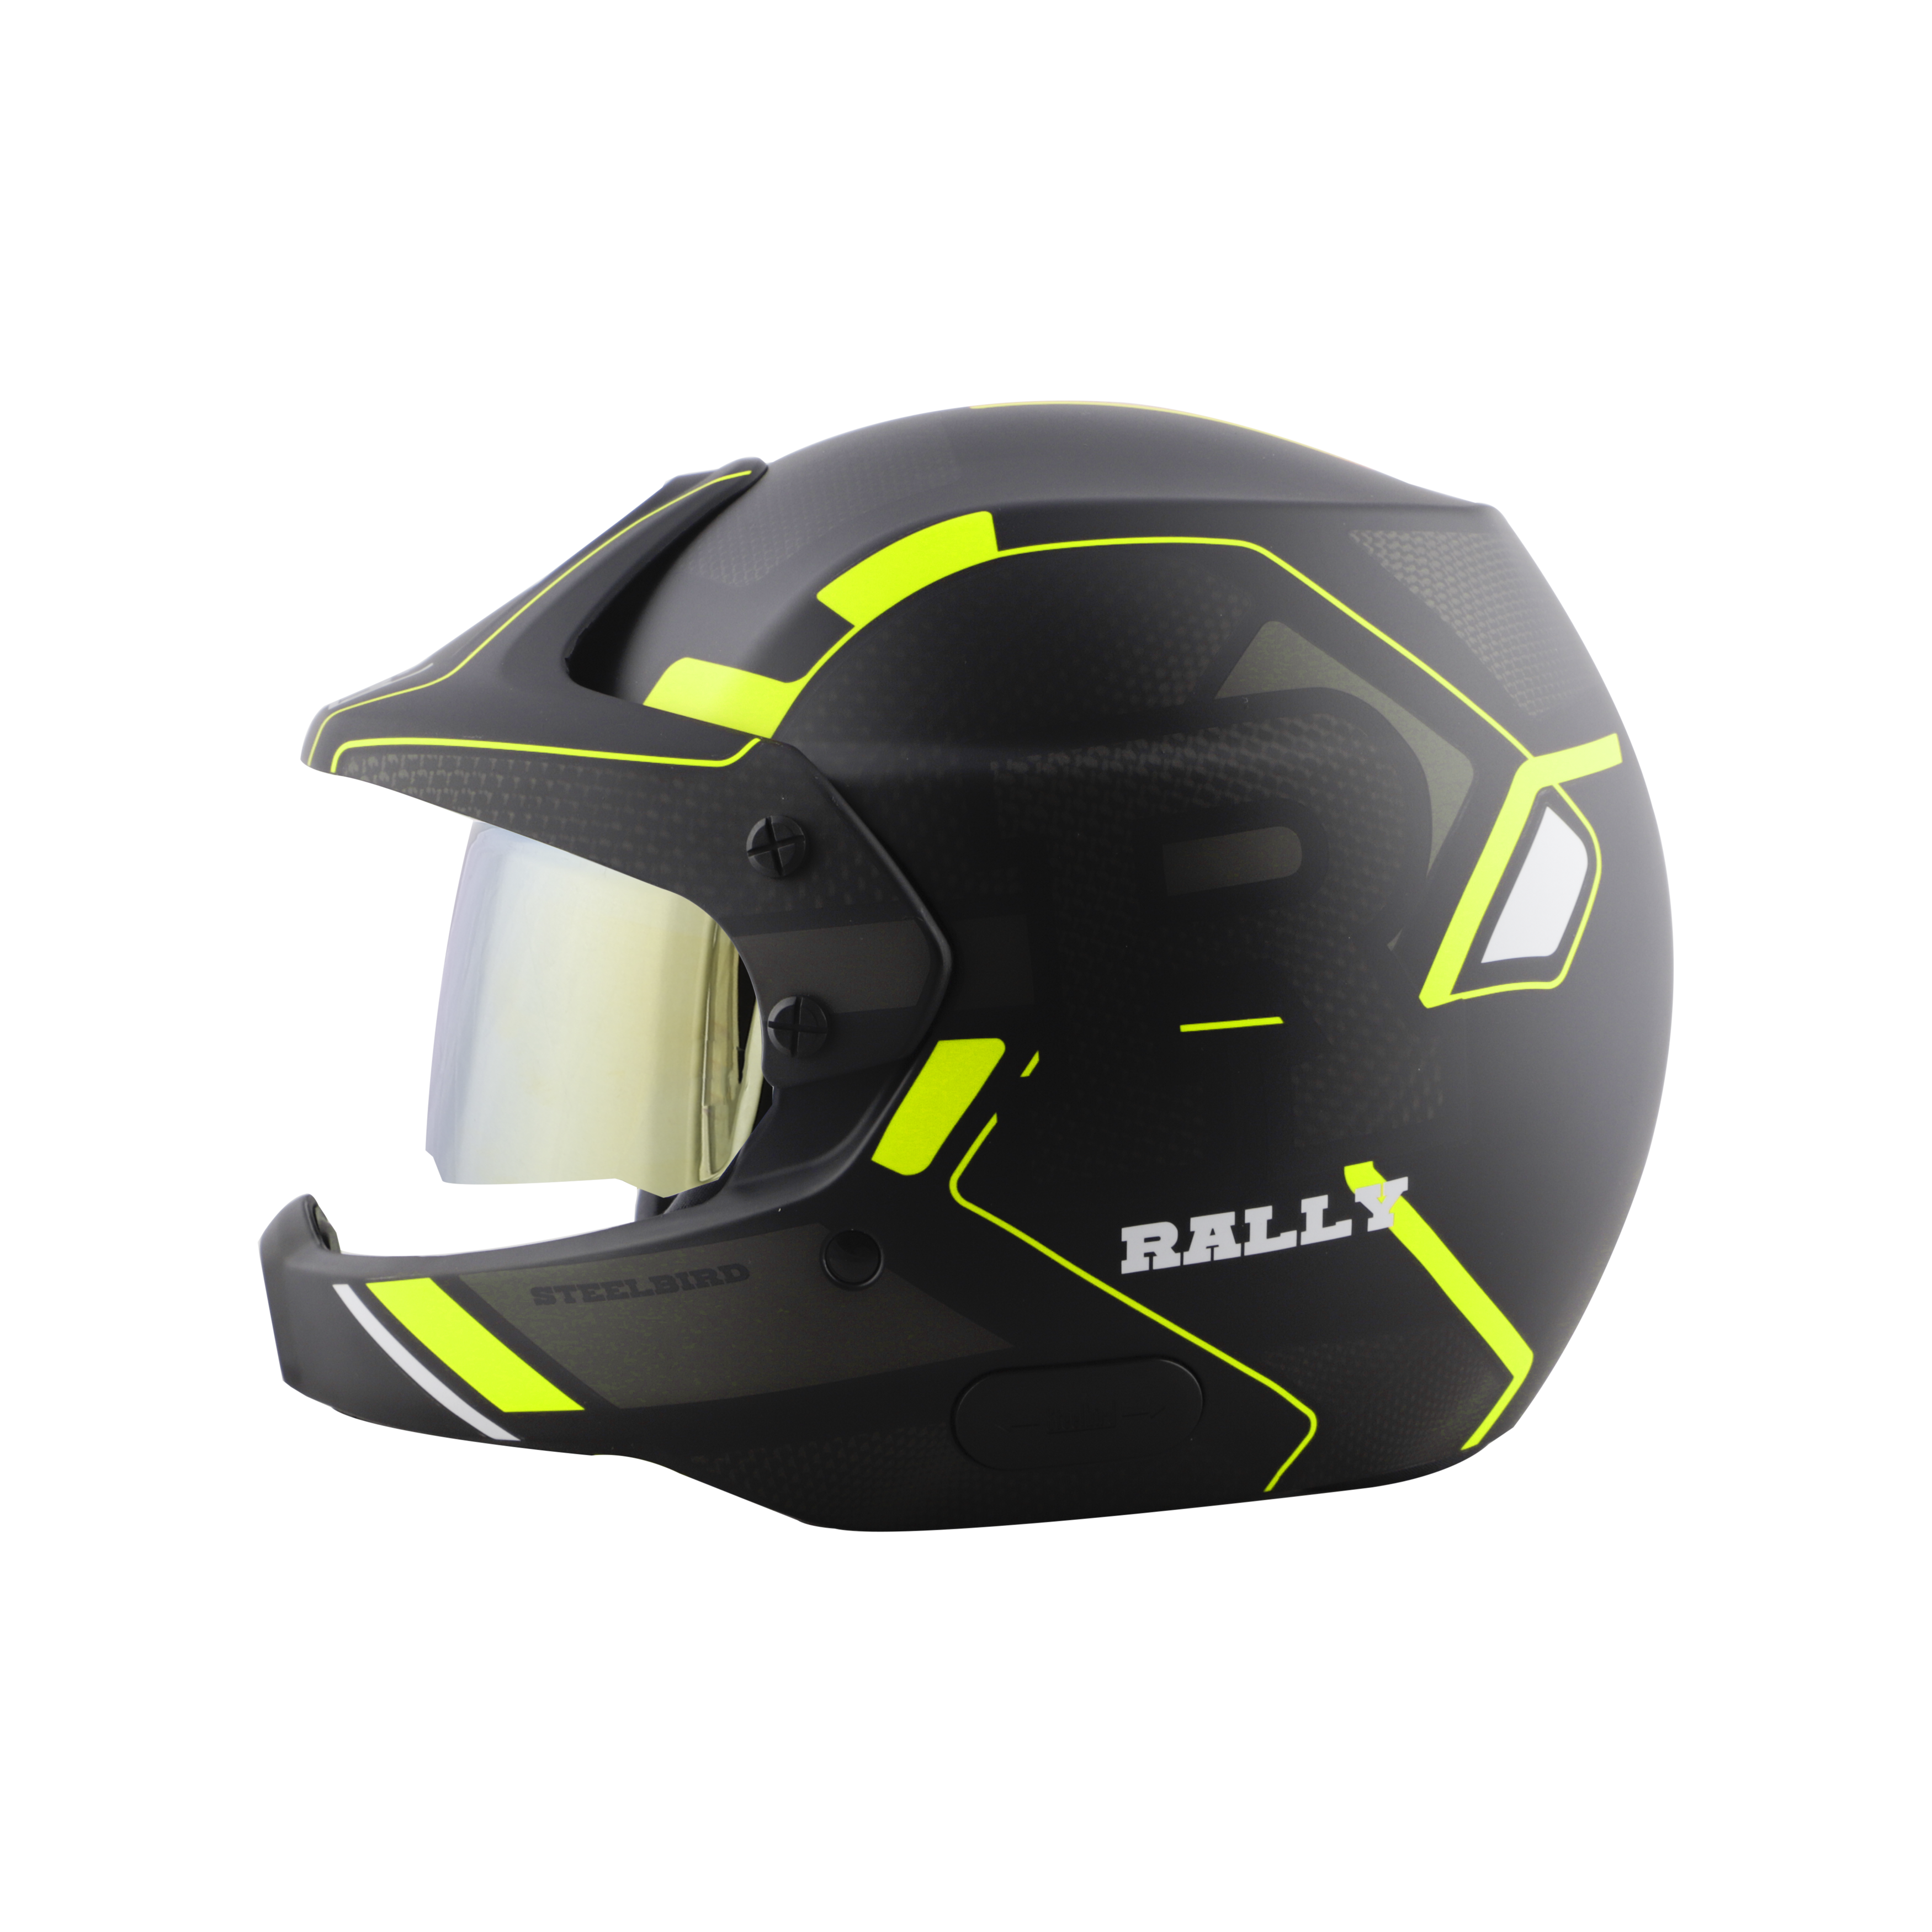 Steelbird 7Wings Rally Beat Open Face ISI Certified Off Road Helmet (Glossy Black Neon With Chrome Gold Visor)